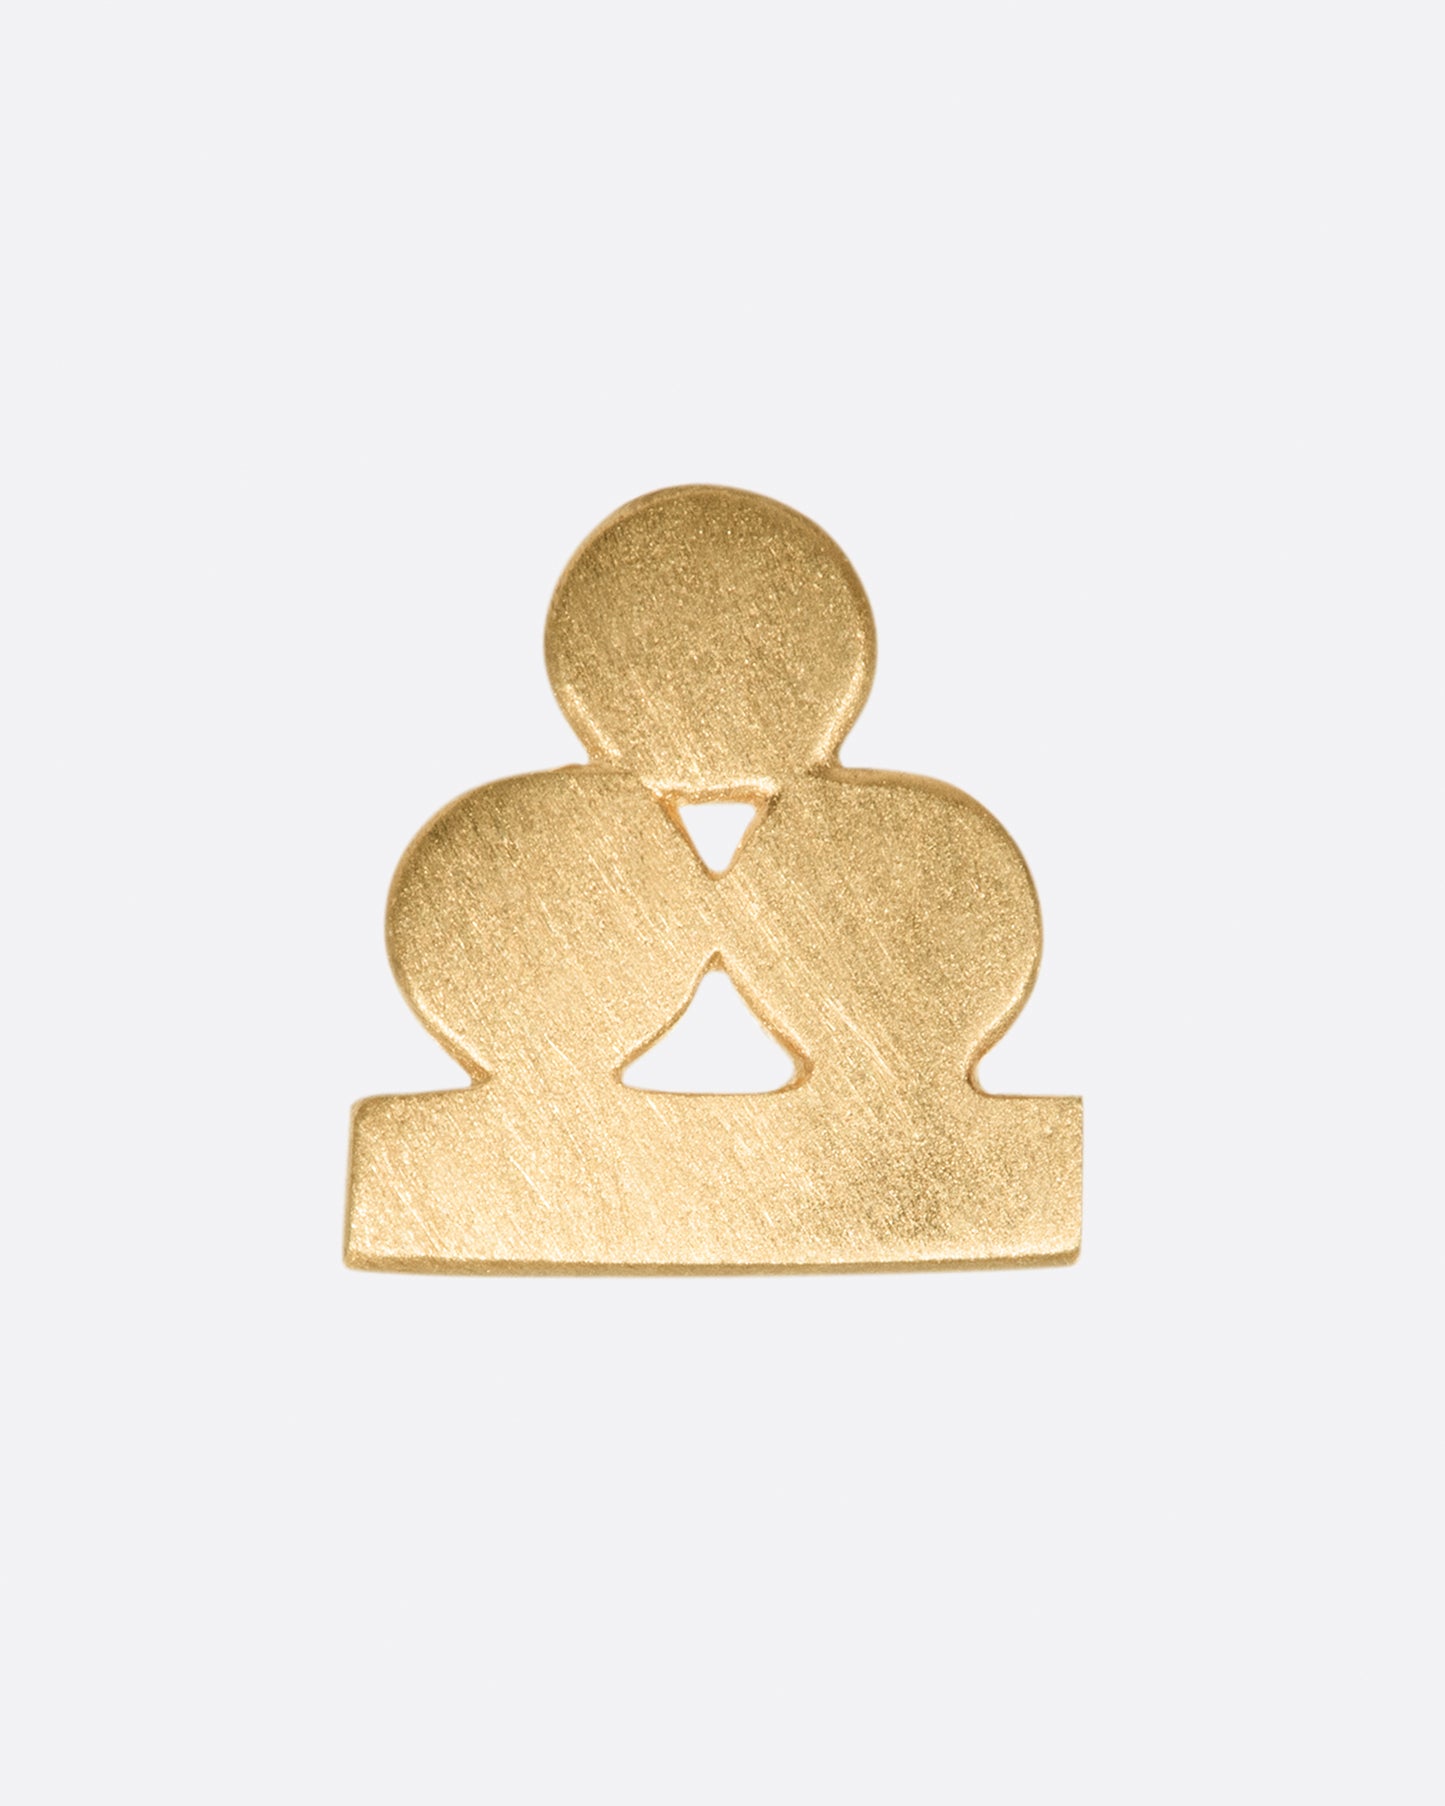 A balancing act, this yellow gold stud earring is comprised of three circles, perfectly in tune with a rectangle.